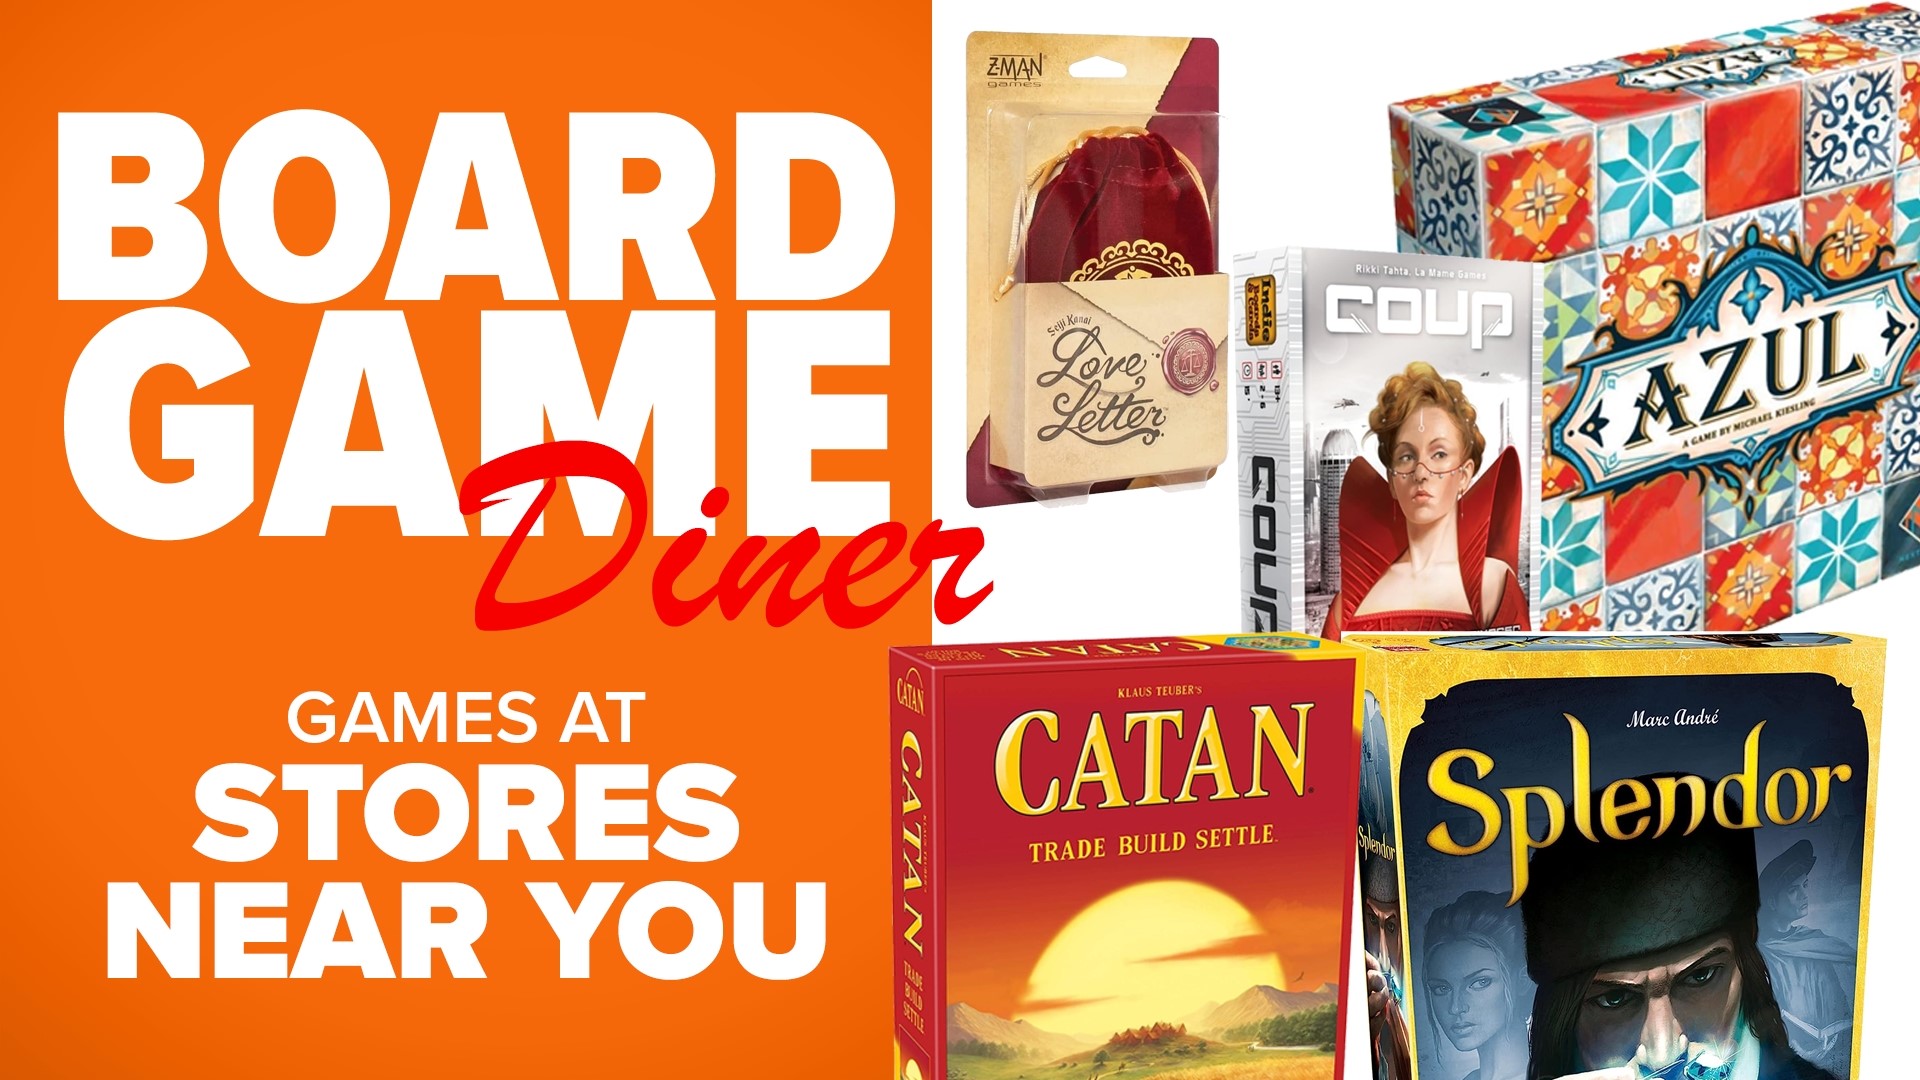 Learn about some of those different games you may see at Target or Barnes and Noble. Discover some new games to play with friends and family.